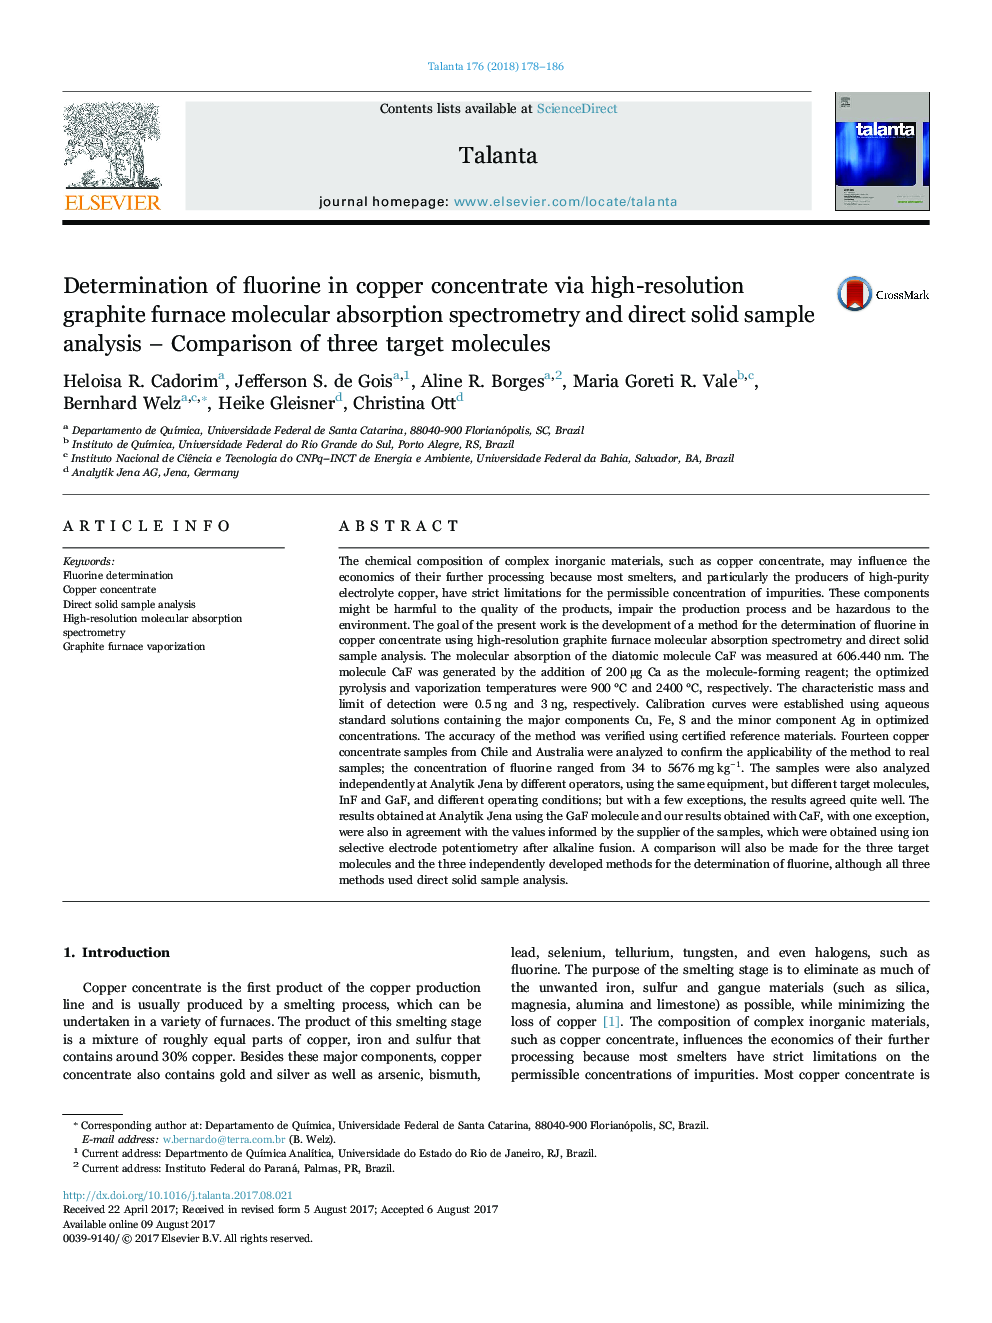 Determination of fluorine in copper concentrate via high-resolution graphite furnace molecular absorption spectrometry and direct solid sample analysis - Comparison of three target molecules